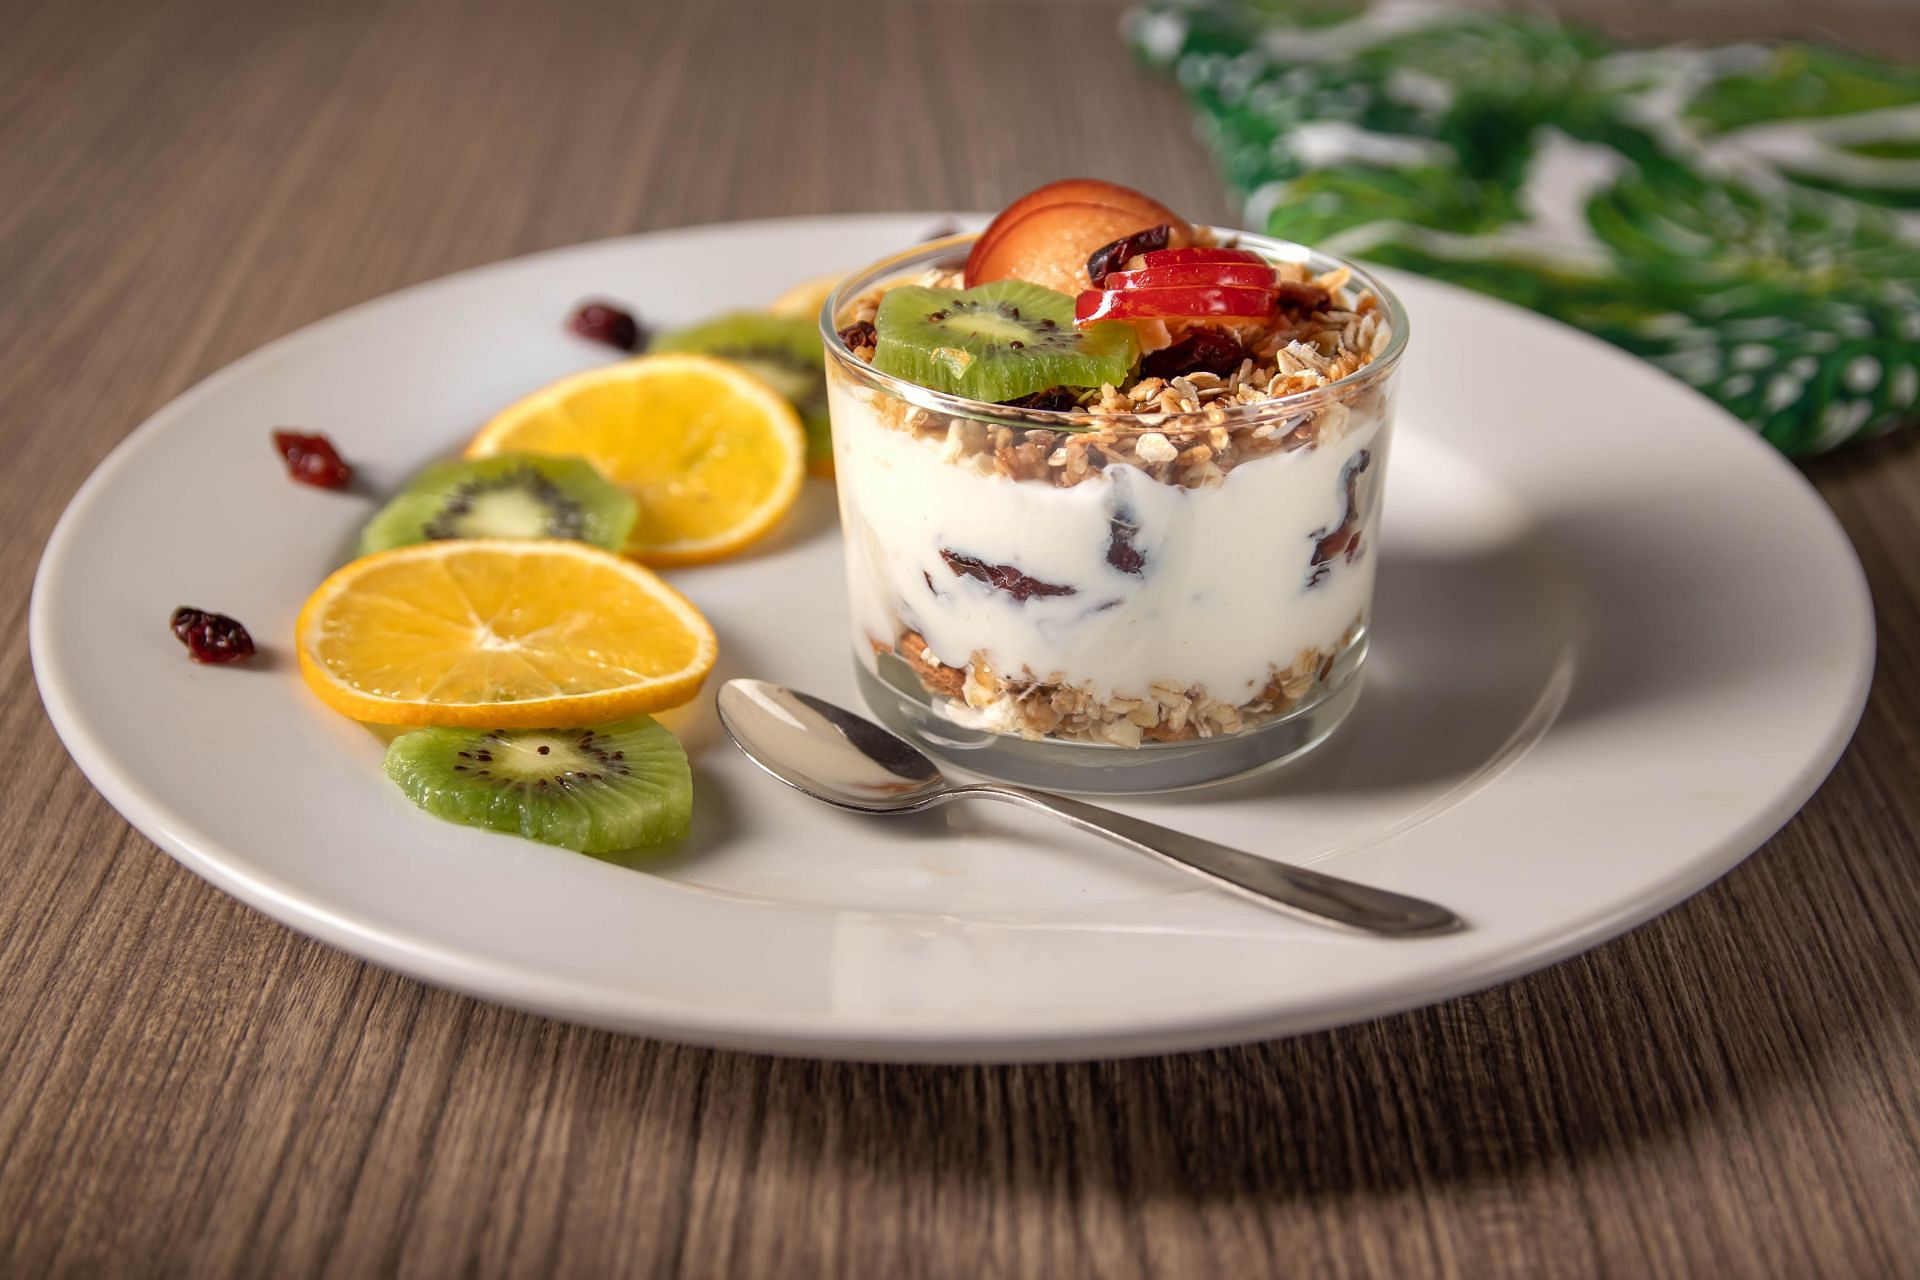 High protein desserts can help you with fat loss (Image via unsplash/Daniel Cabriles)